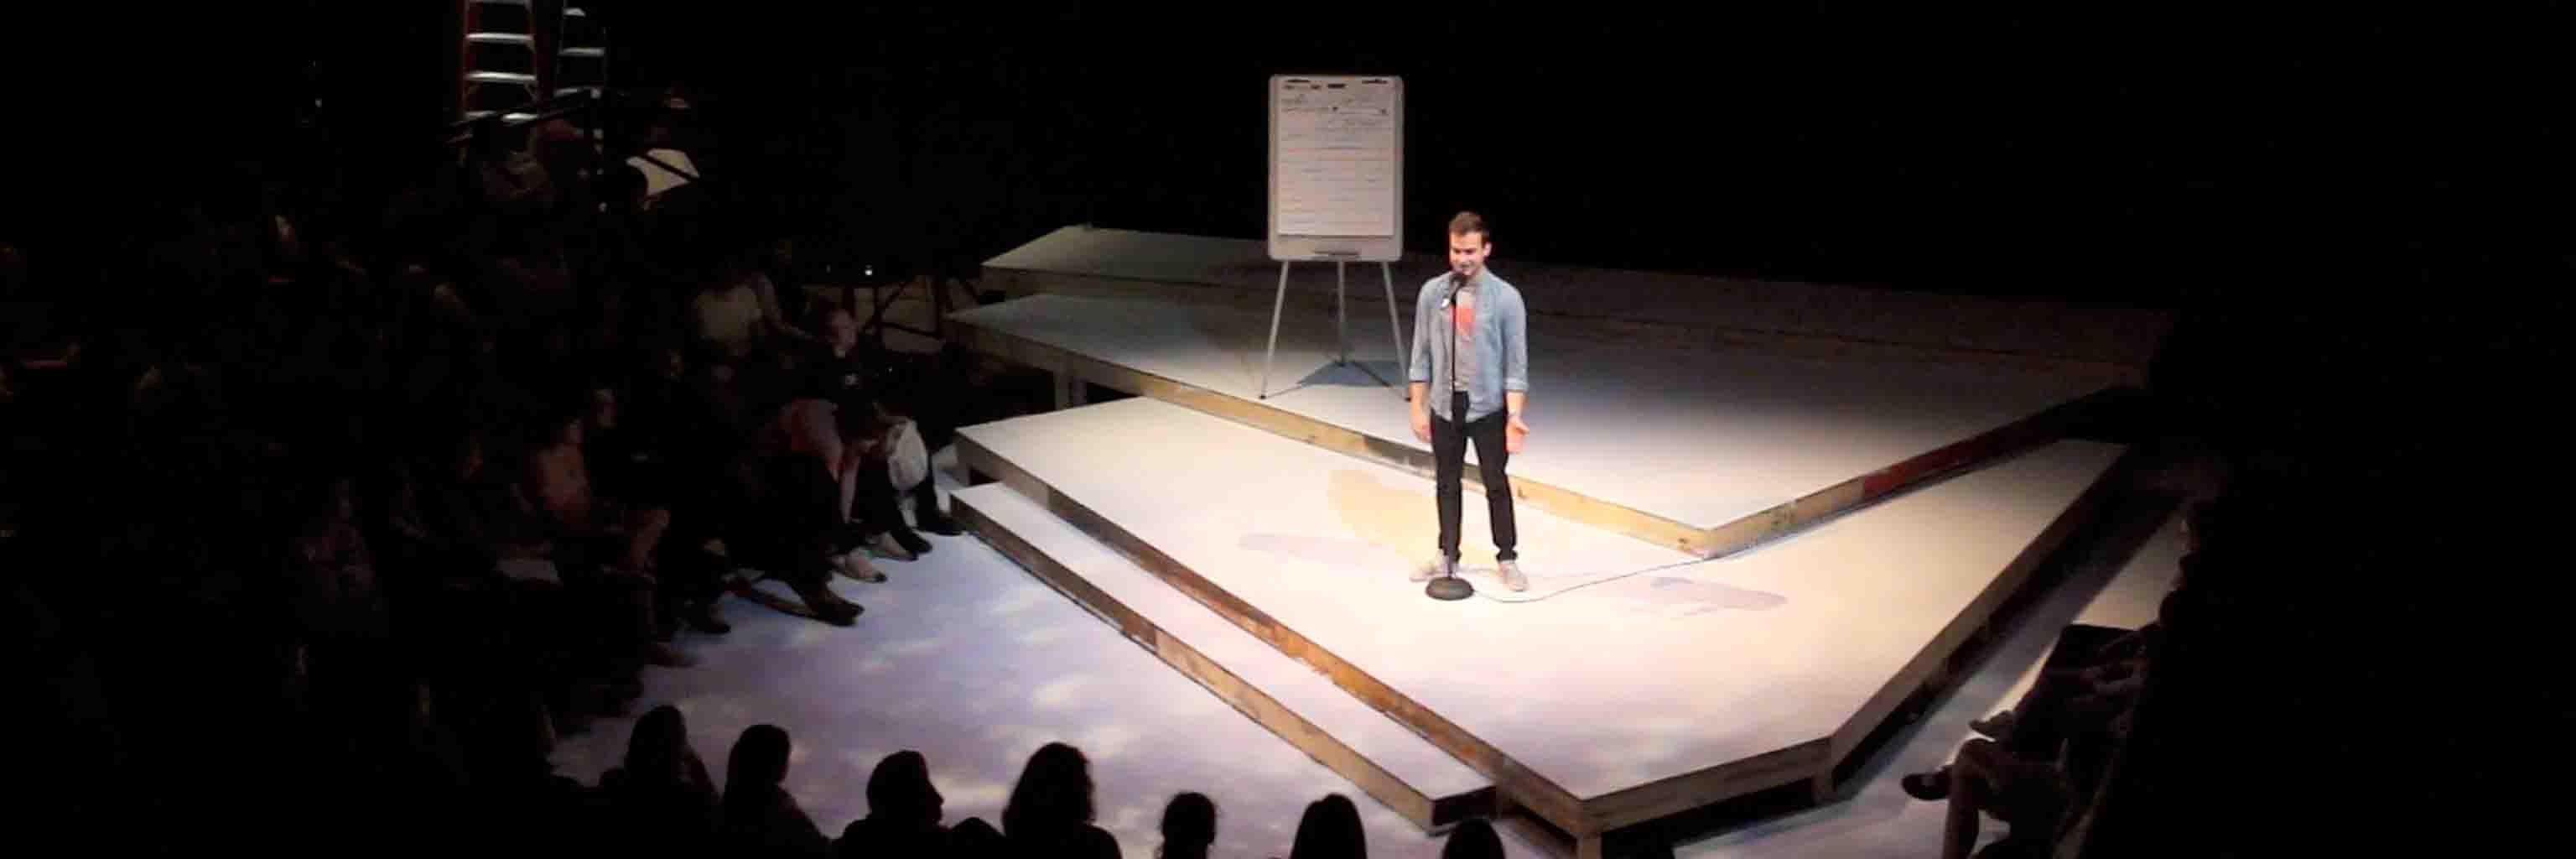 A Moth workshop participant tells a story onstage.